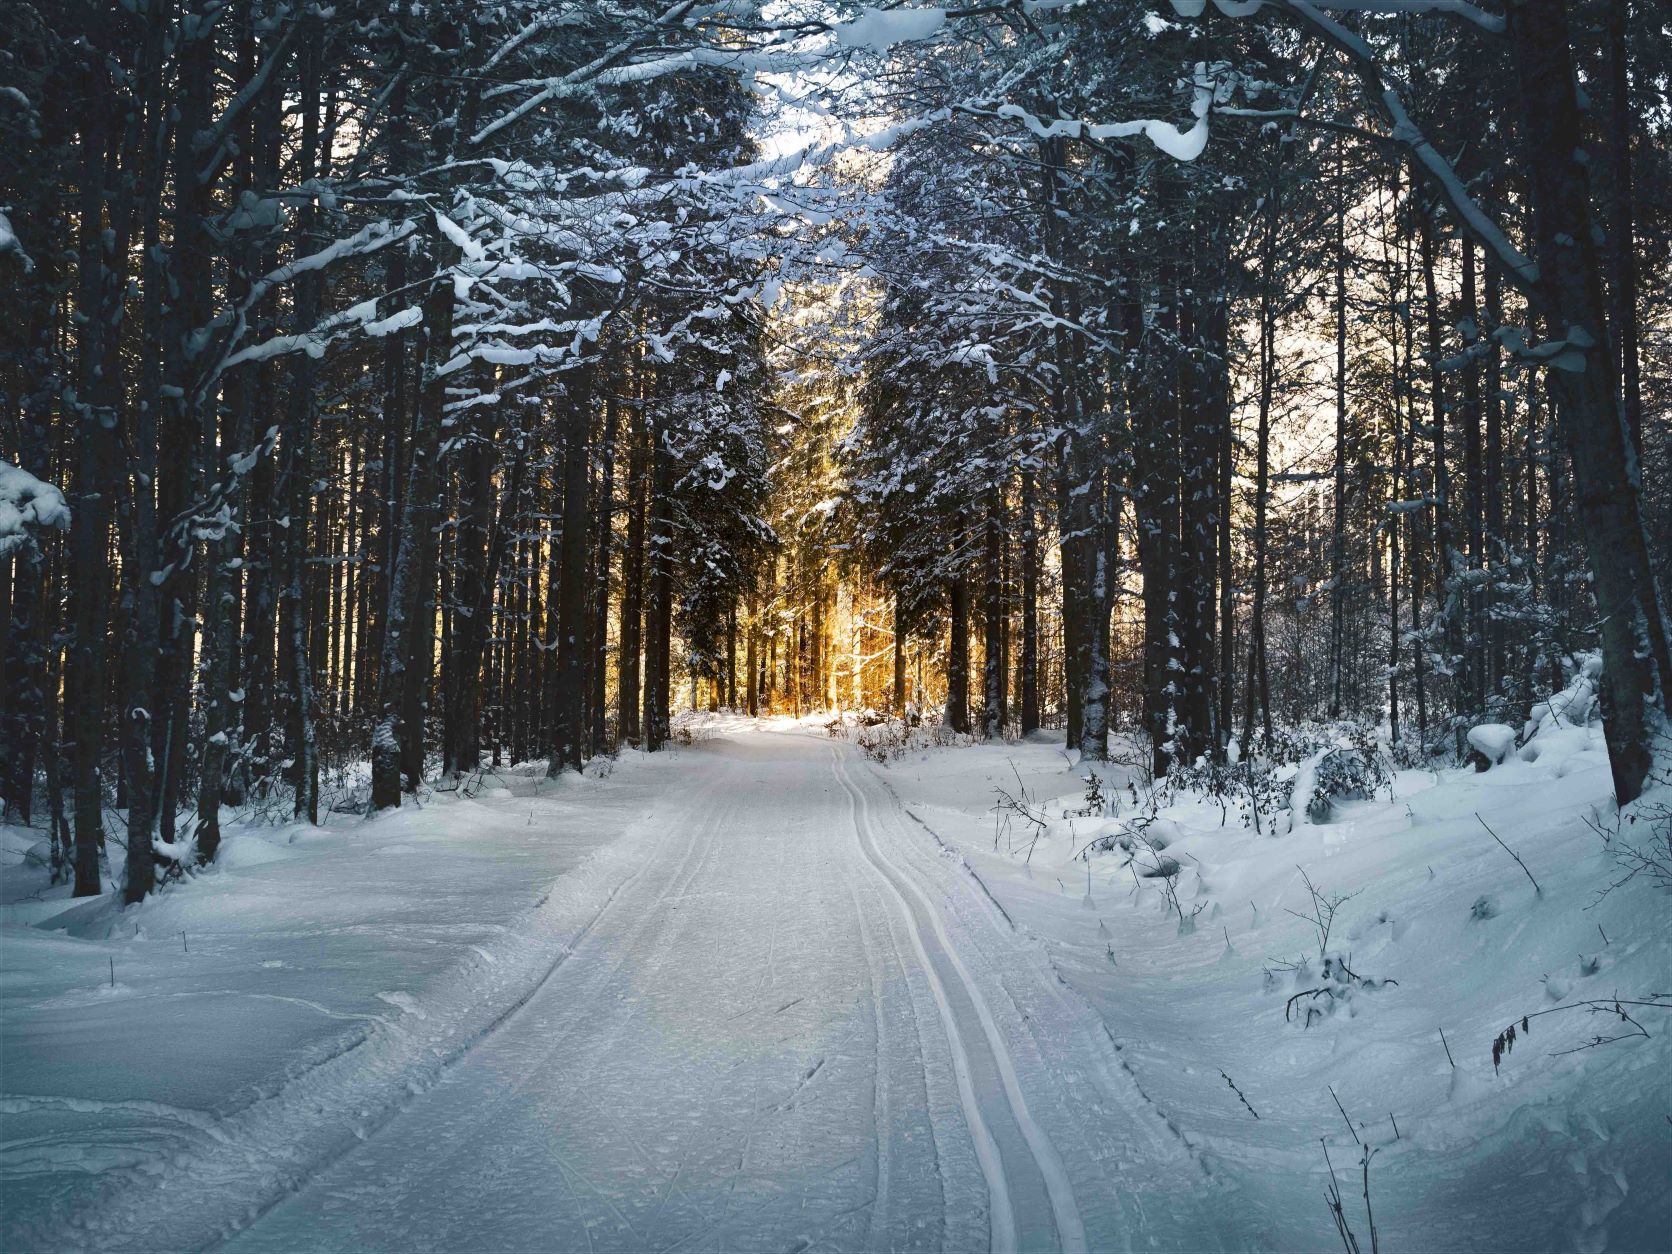 A winter scene in the forest.